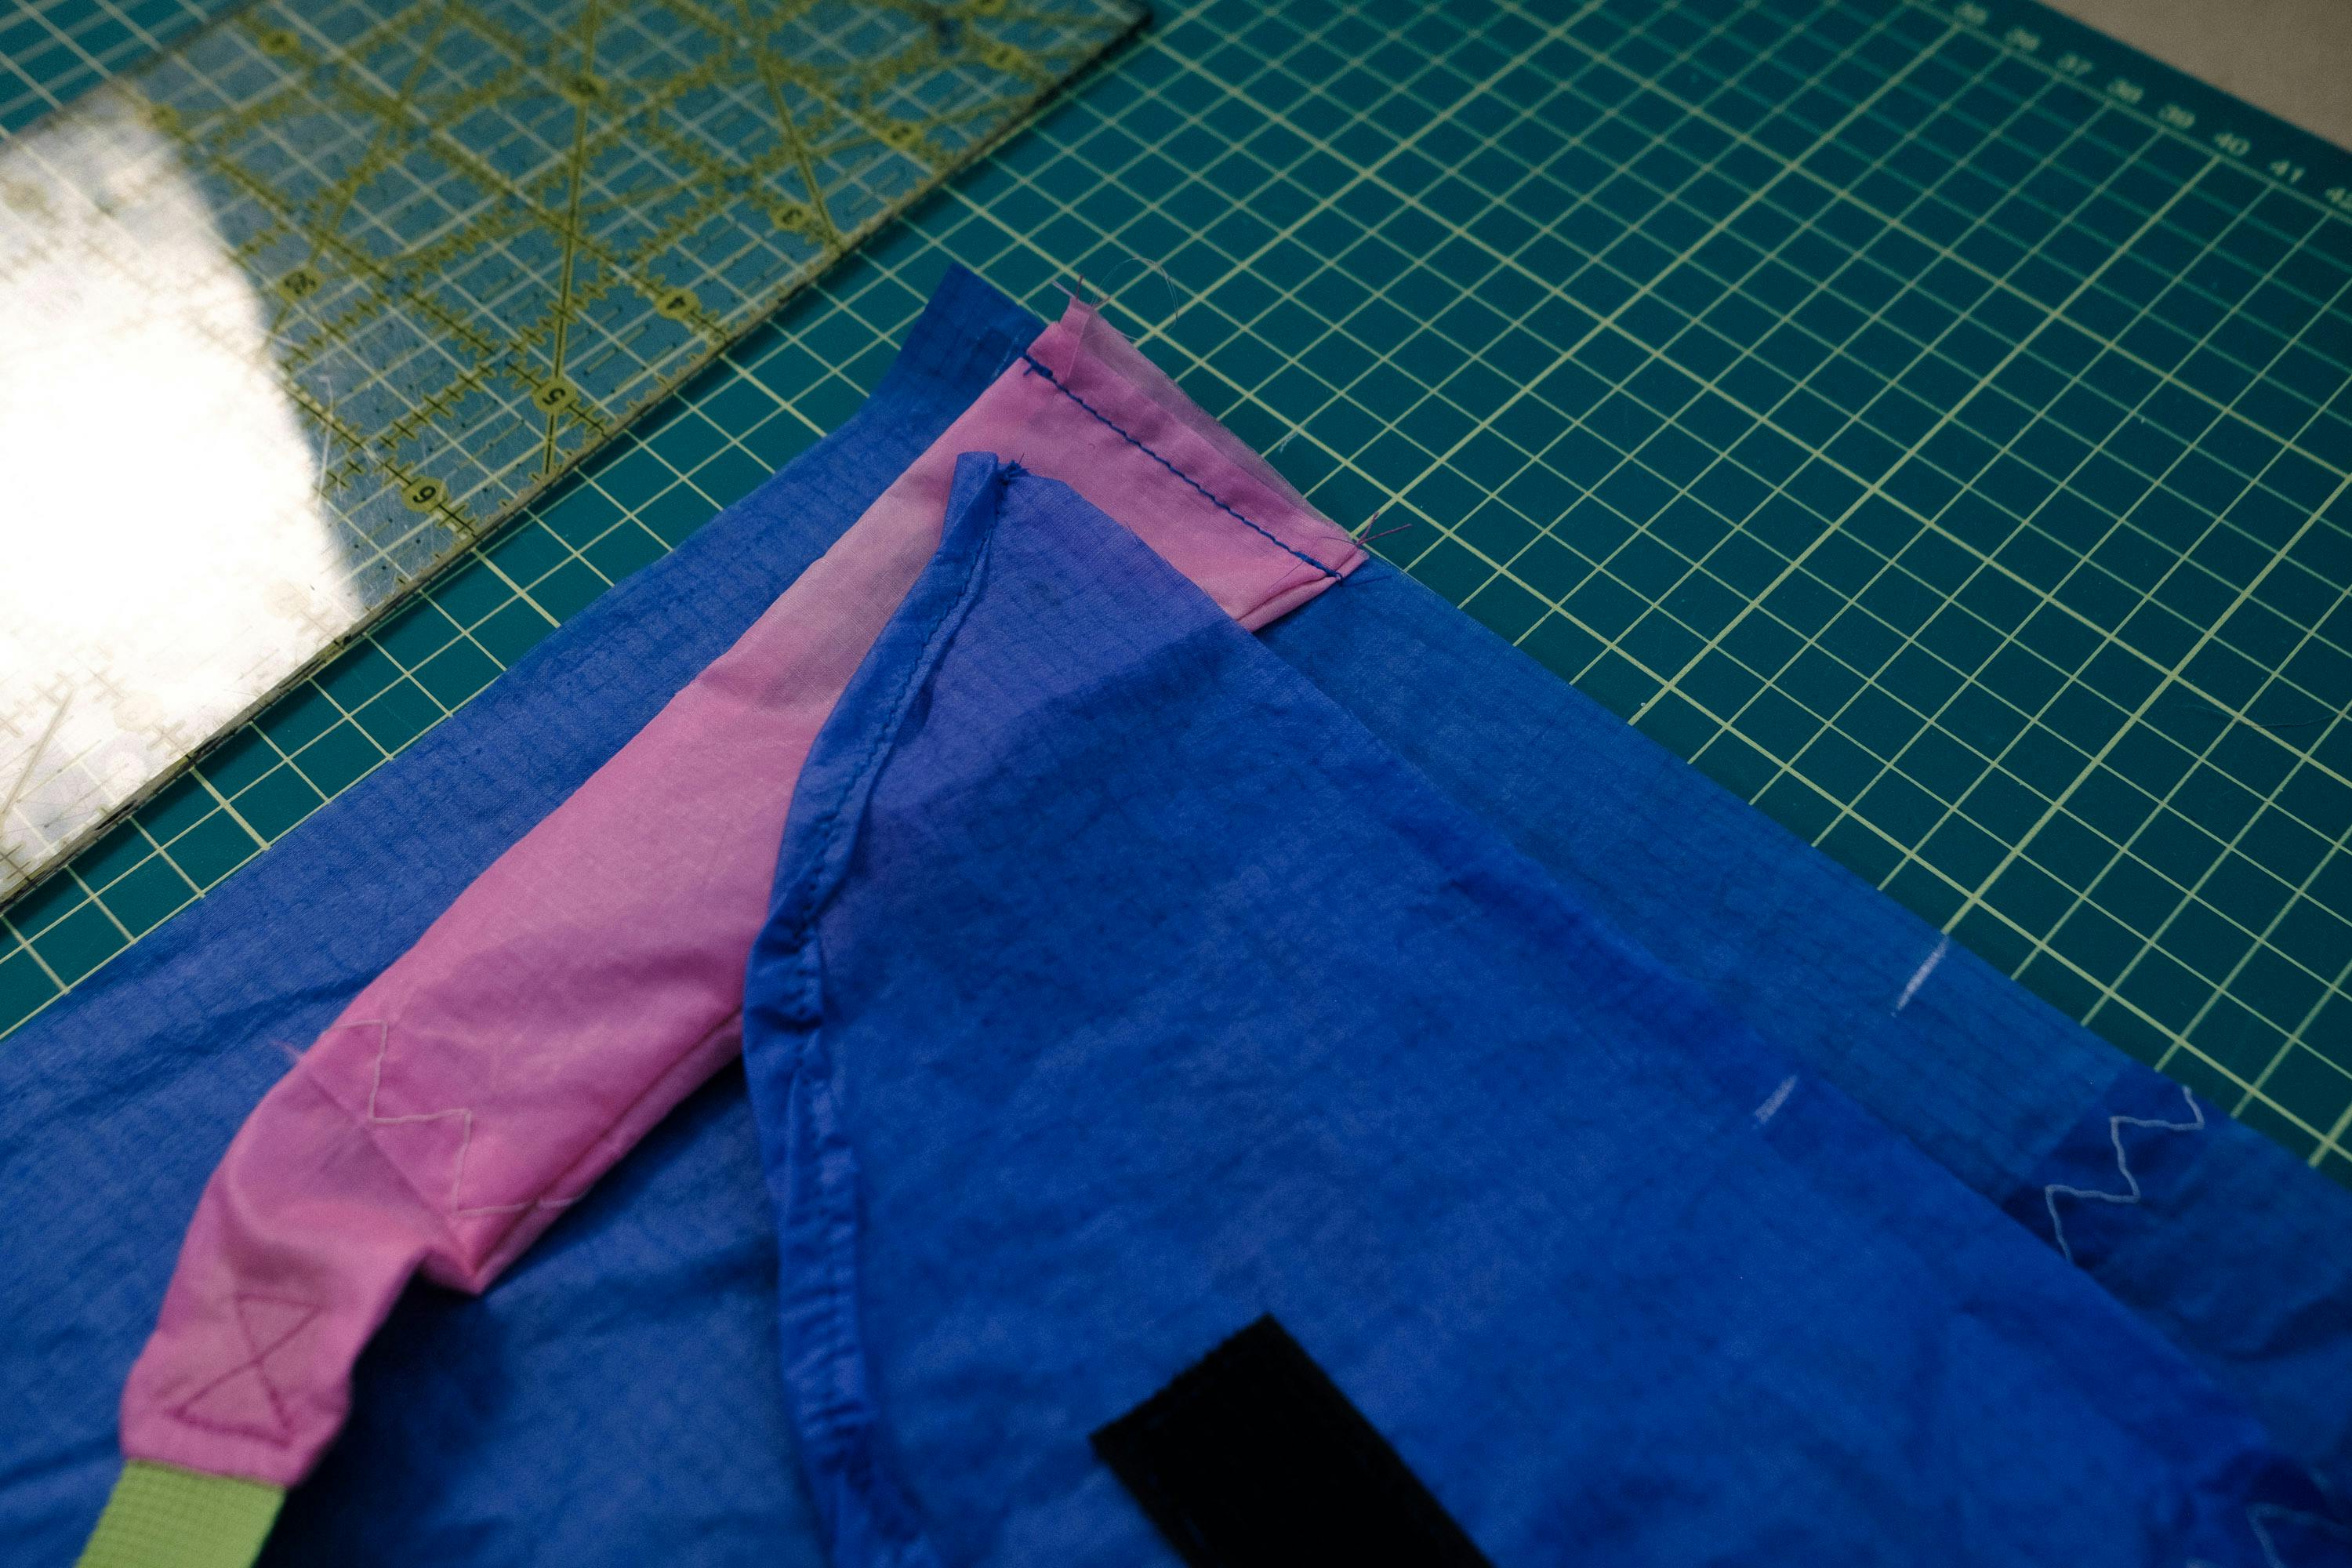 Sewing the front flap to the body.